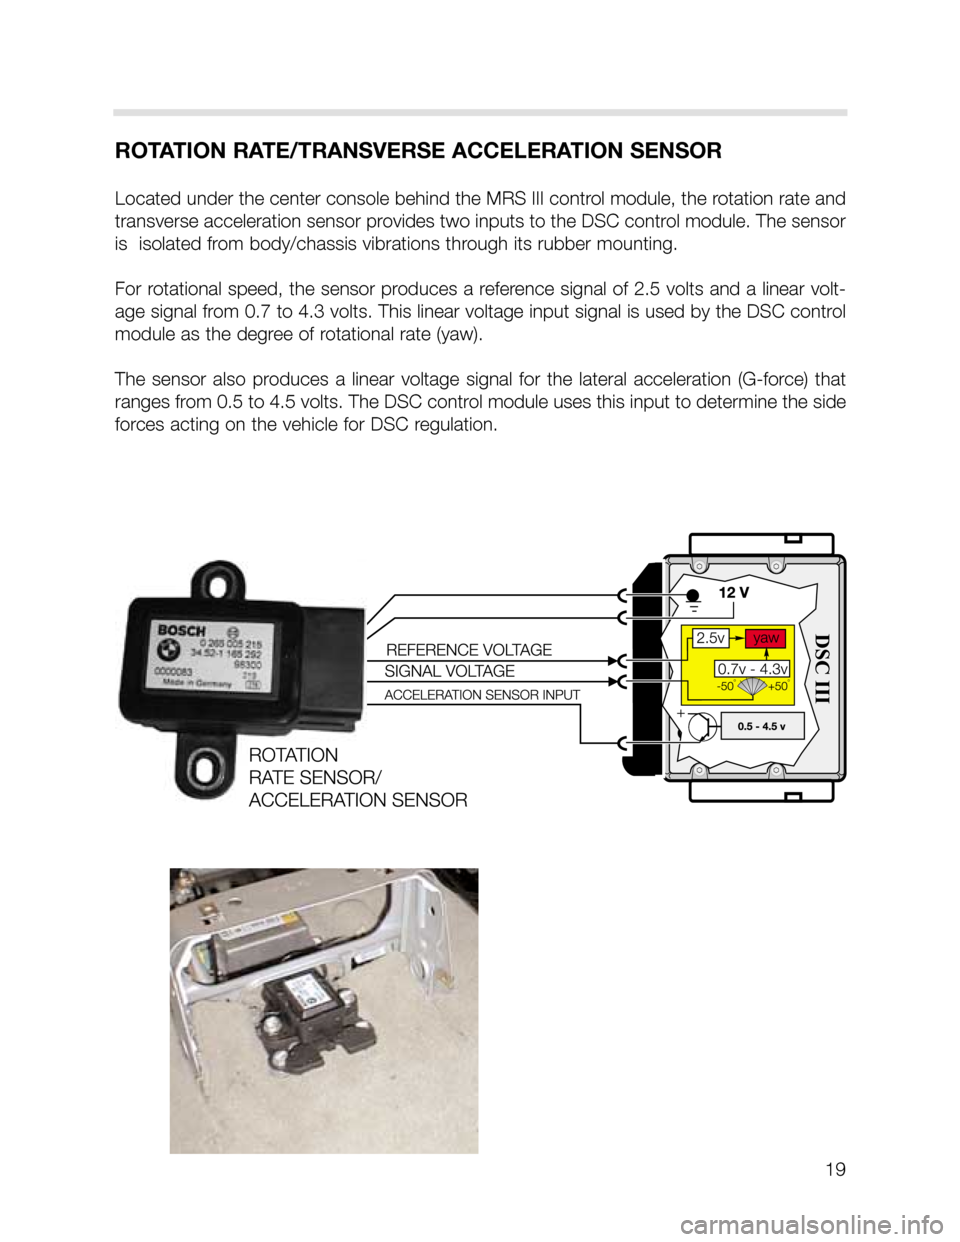 BMW X5 2005 E53 DSC System Workshop Manual 19
ROTATION RATE/TRANSVERSE ACCELERATION SENSOR
Located under the center console behind the MRS III control module, the rotation rate and
transverse acceleration sensor provides two inputs to the DSC 